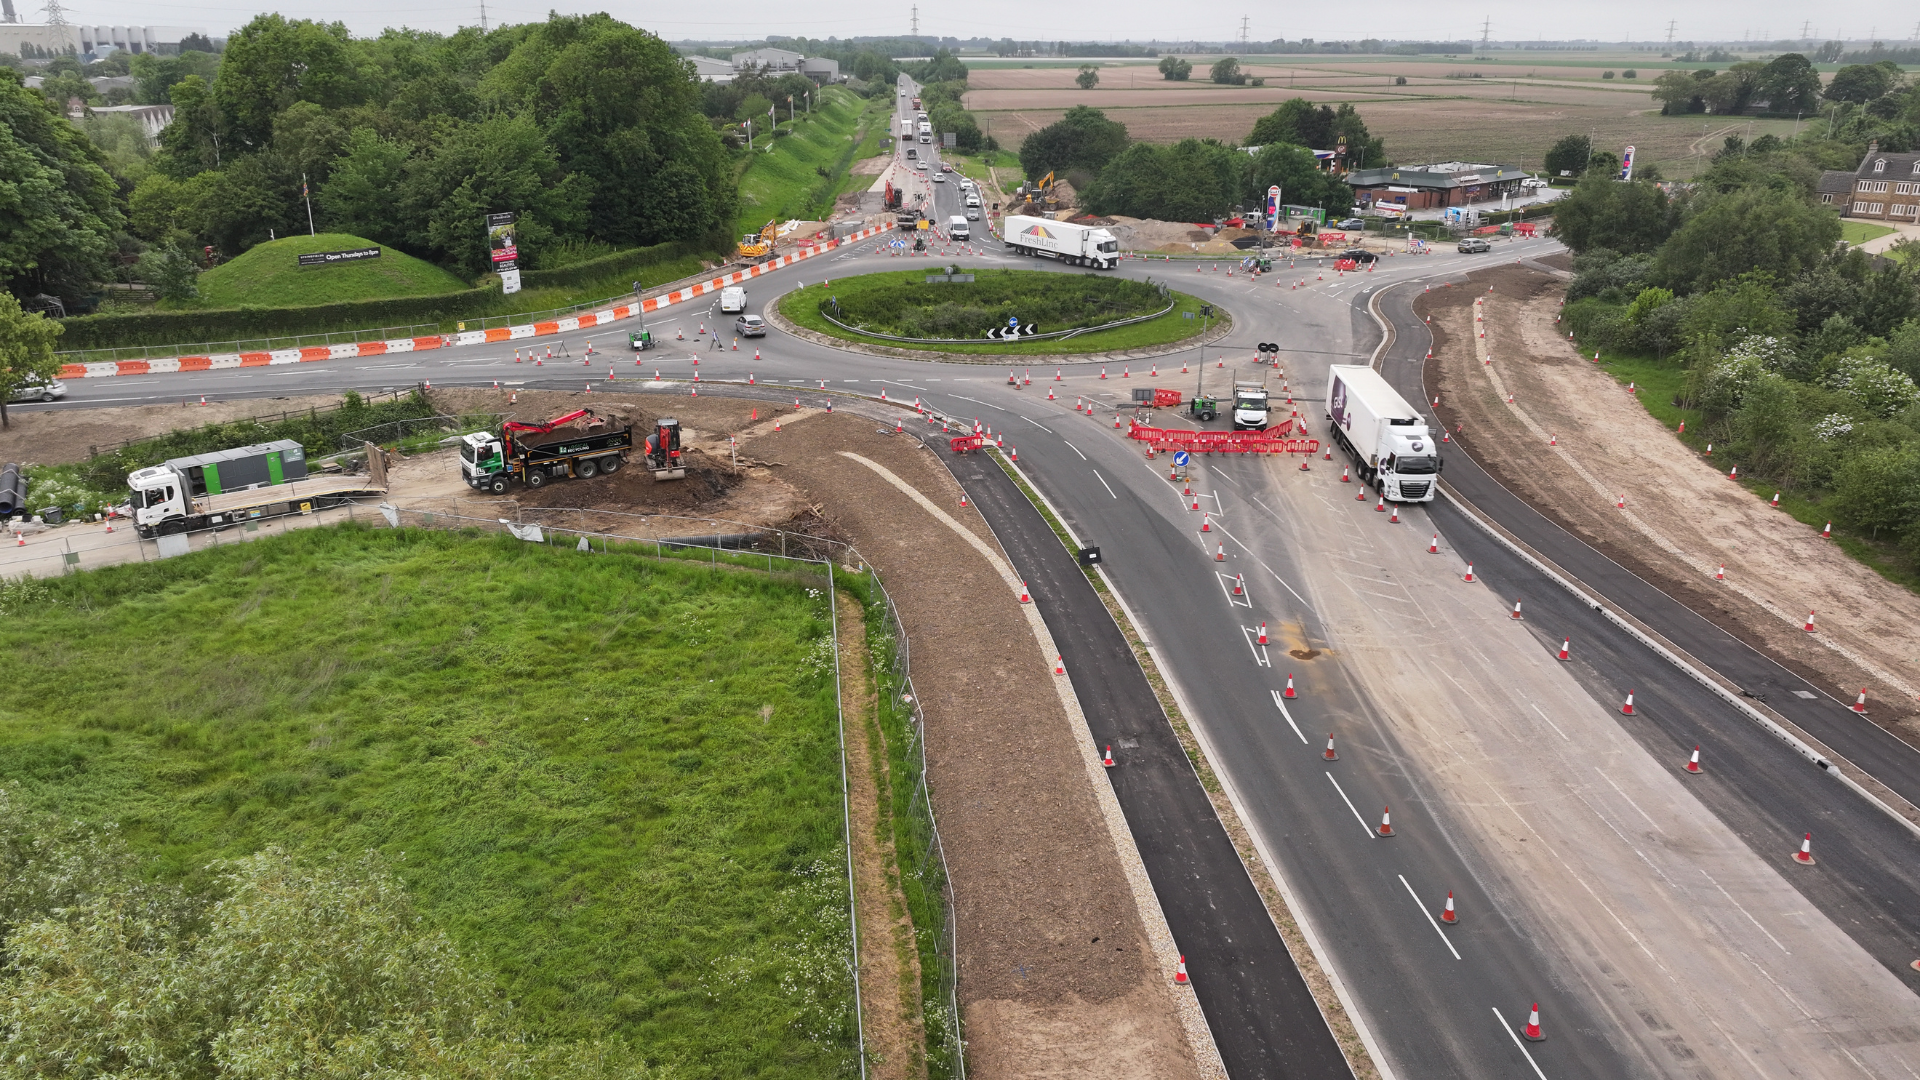 An overhead view of the Springfield roundabout